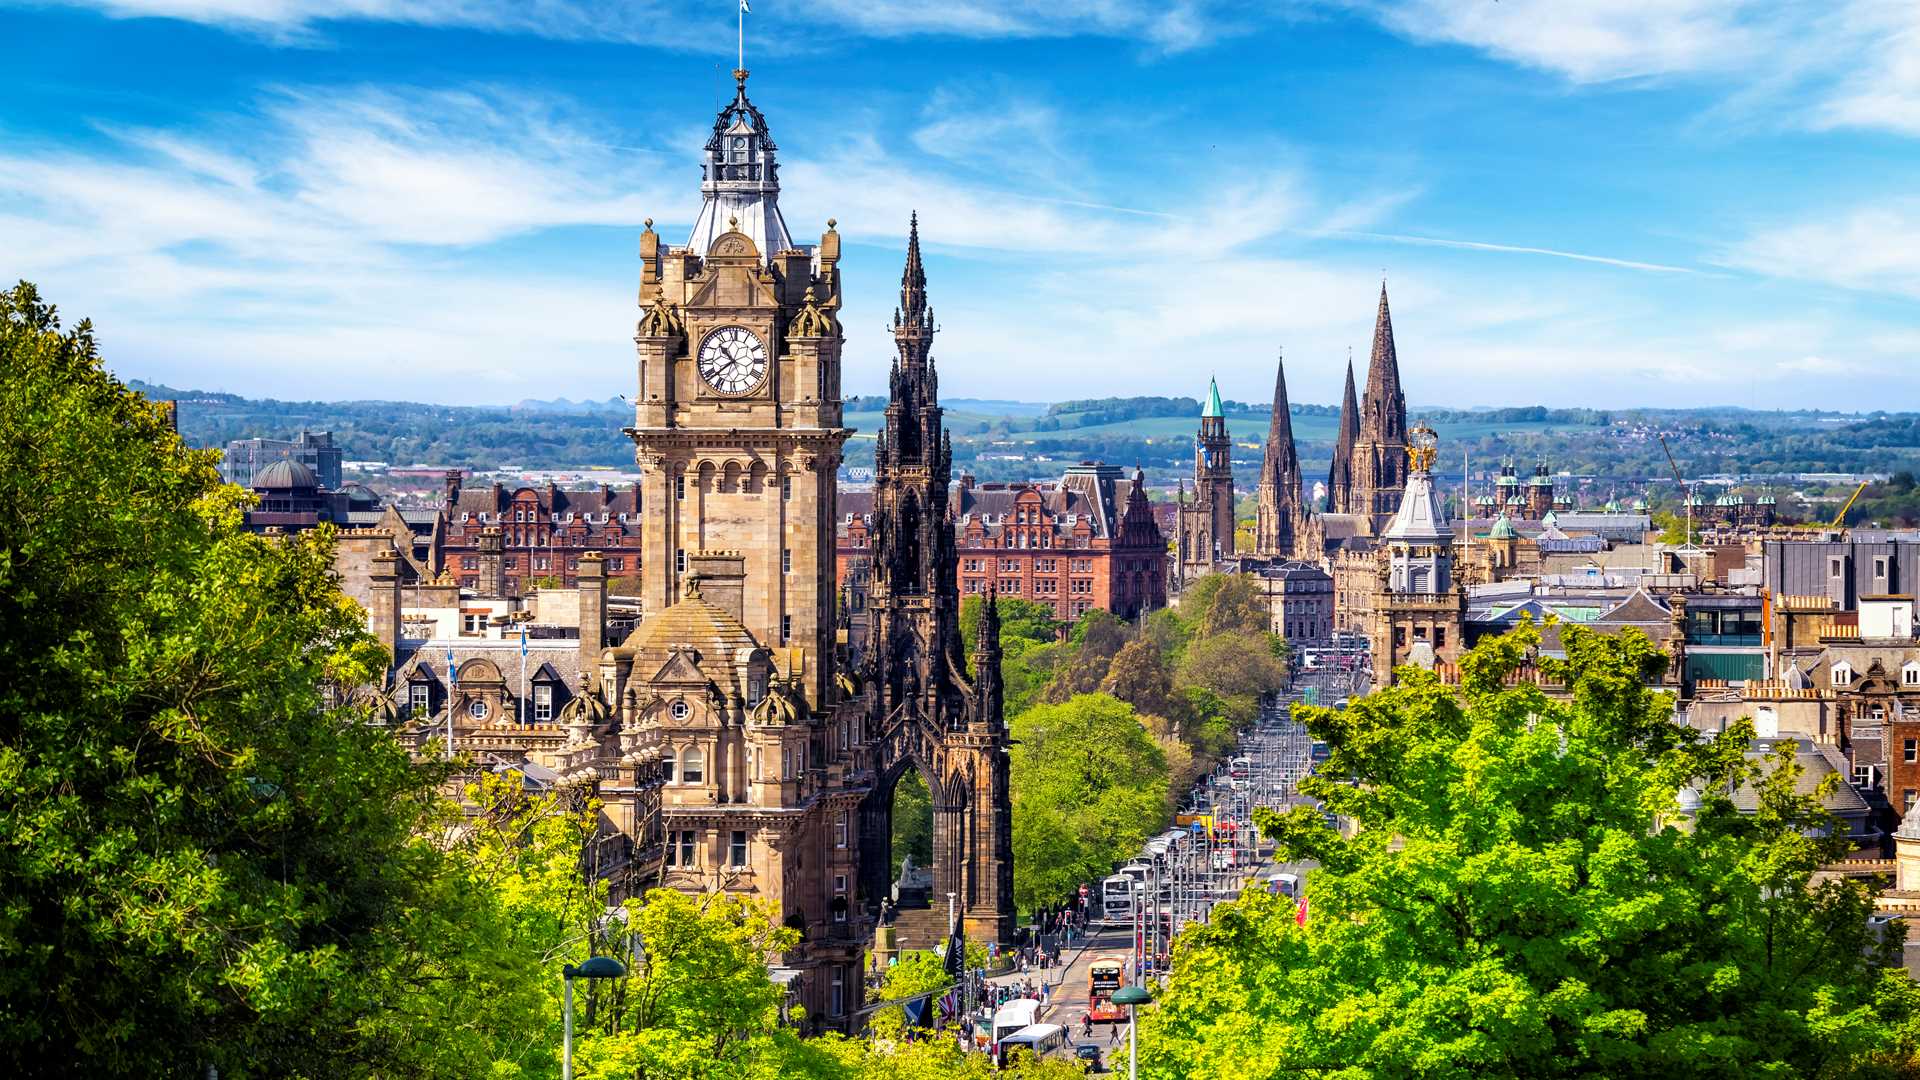 Edinburgh and Glasgow listed as UK innovation hubs in new Knight Frank report